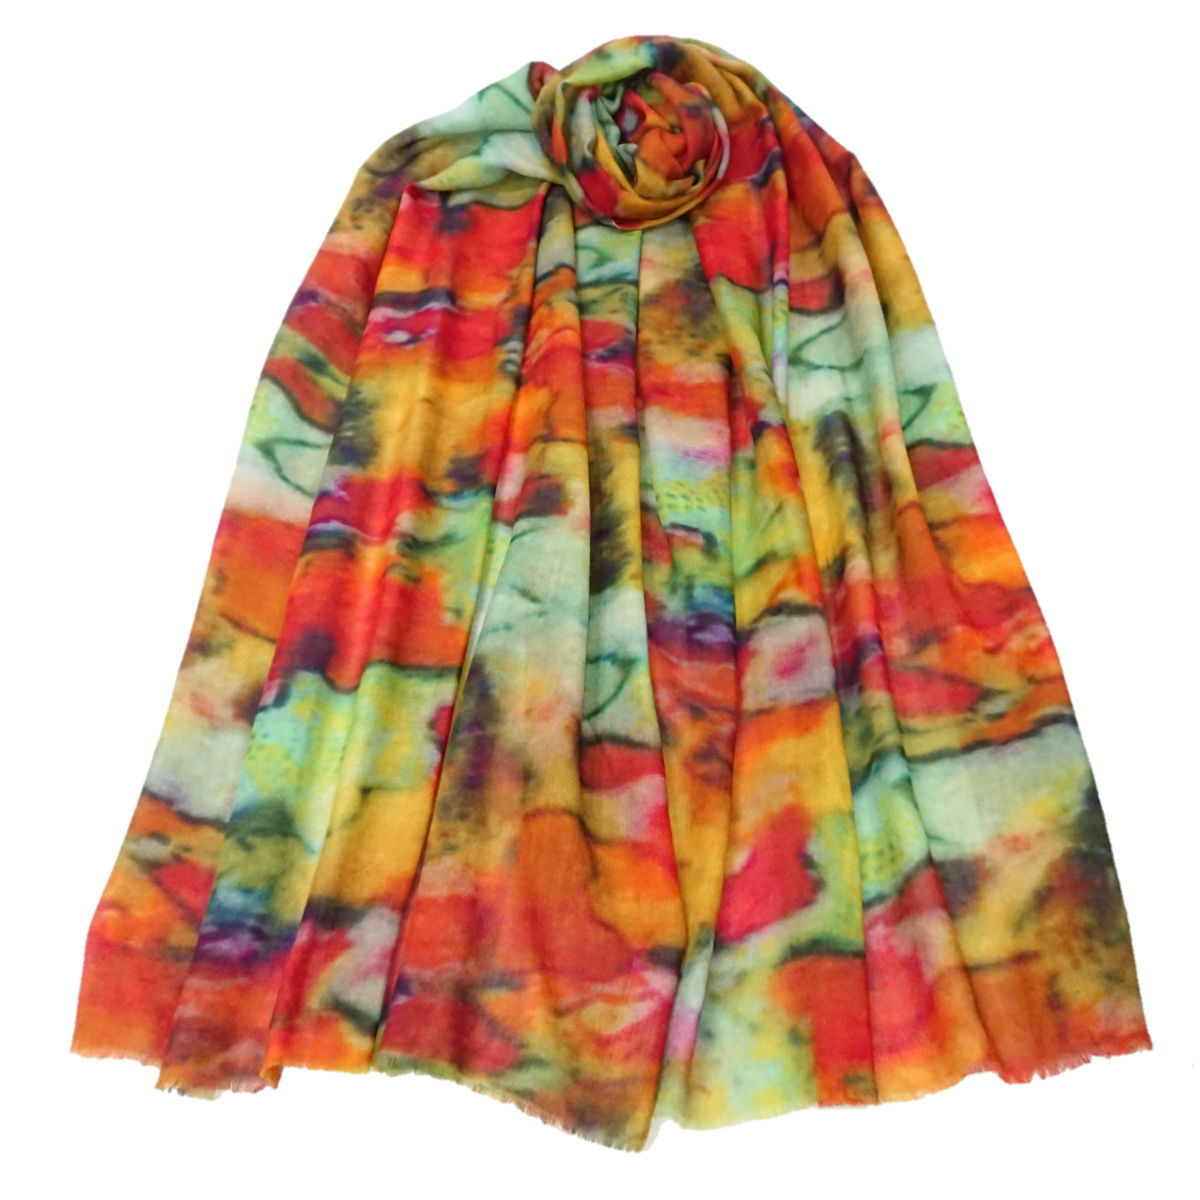 Printed Pashmina Stole - Warm Ginger Abstract - TCG London